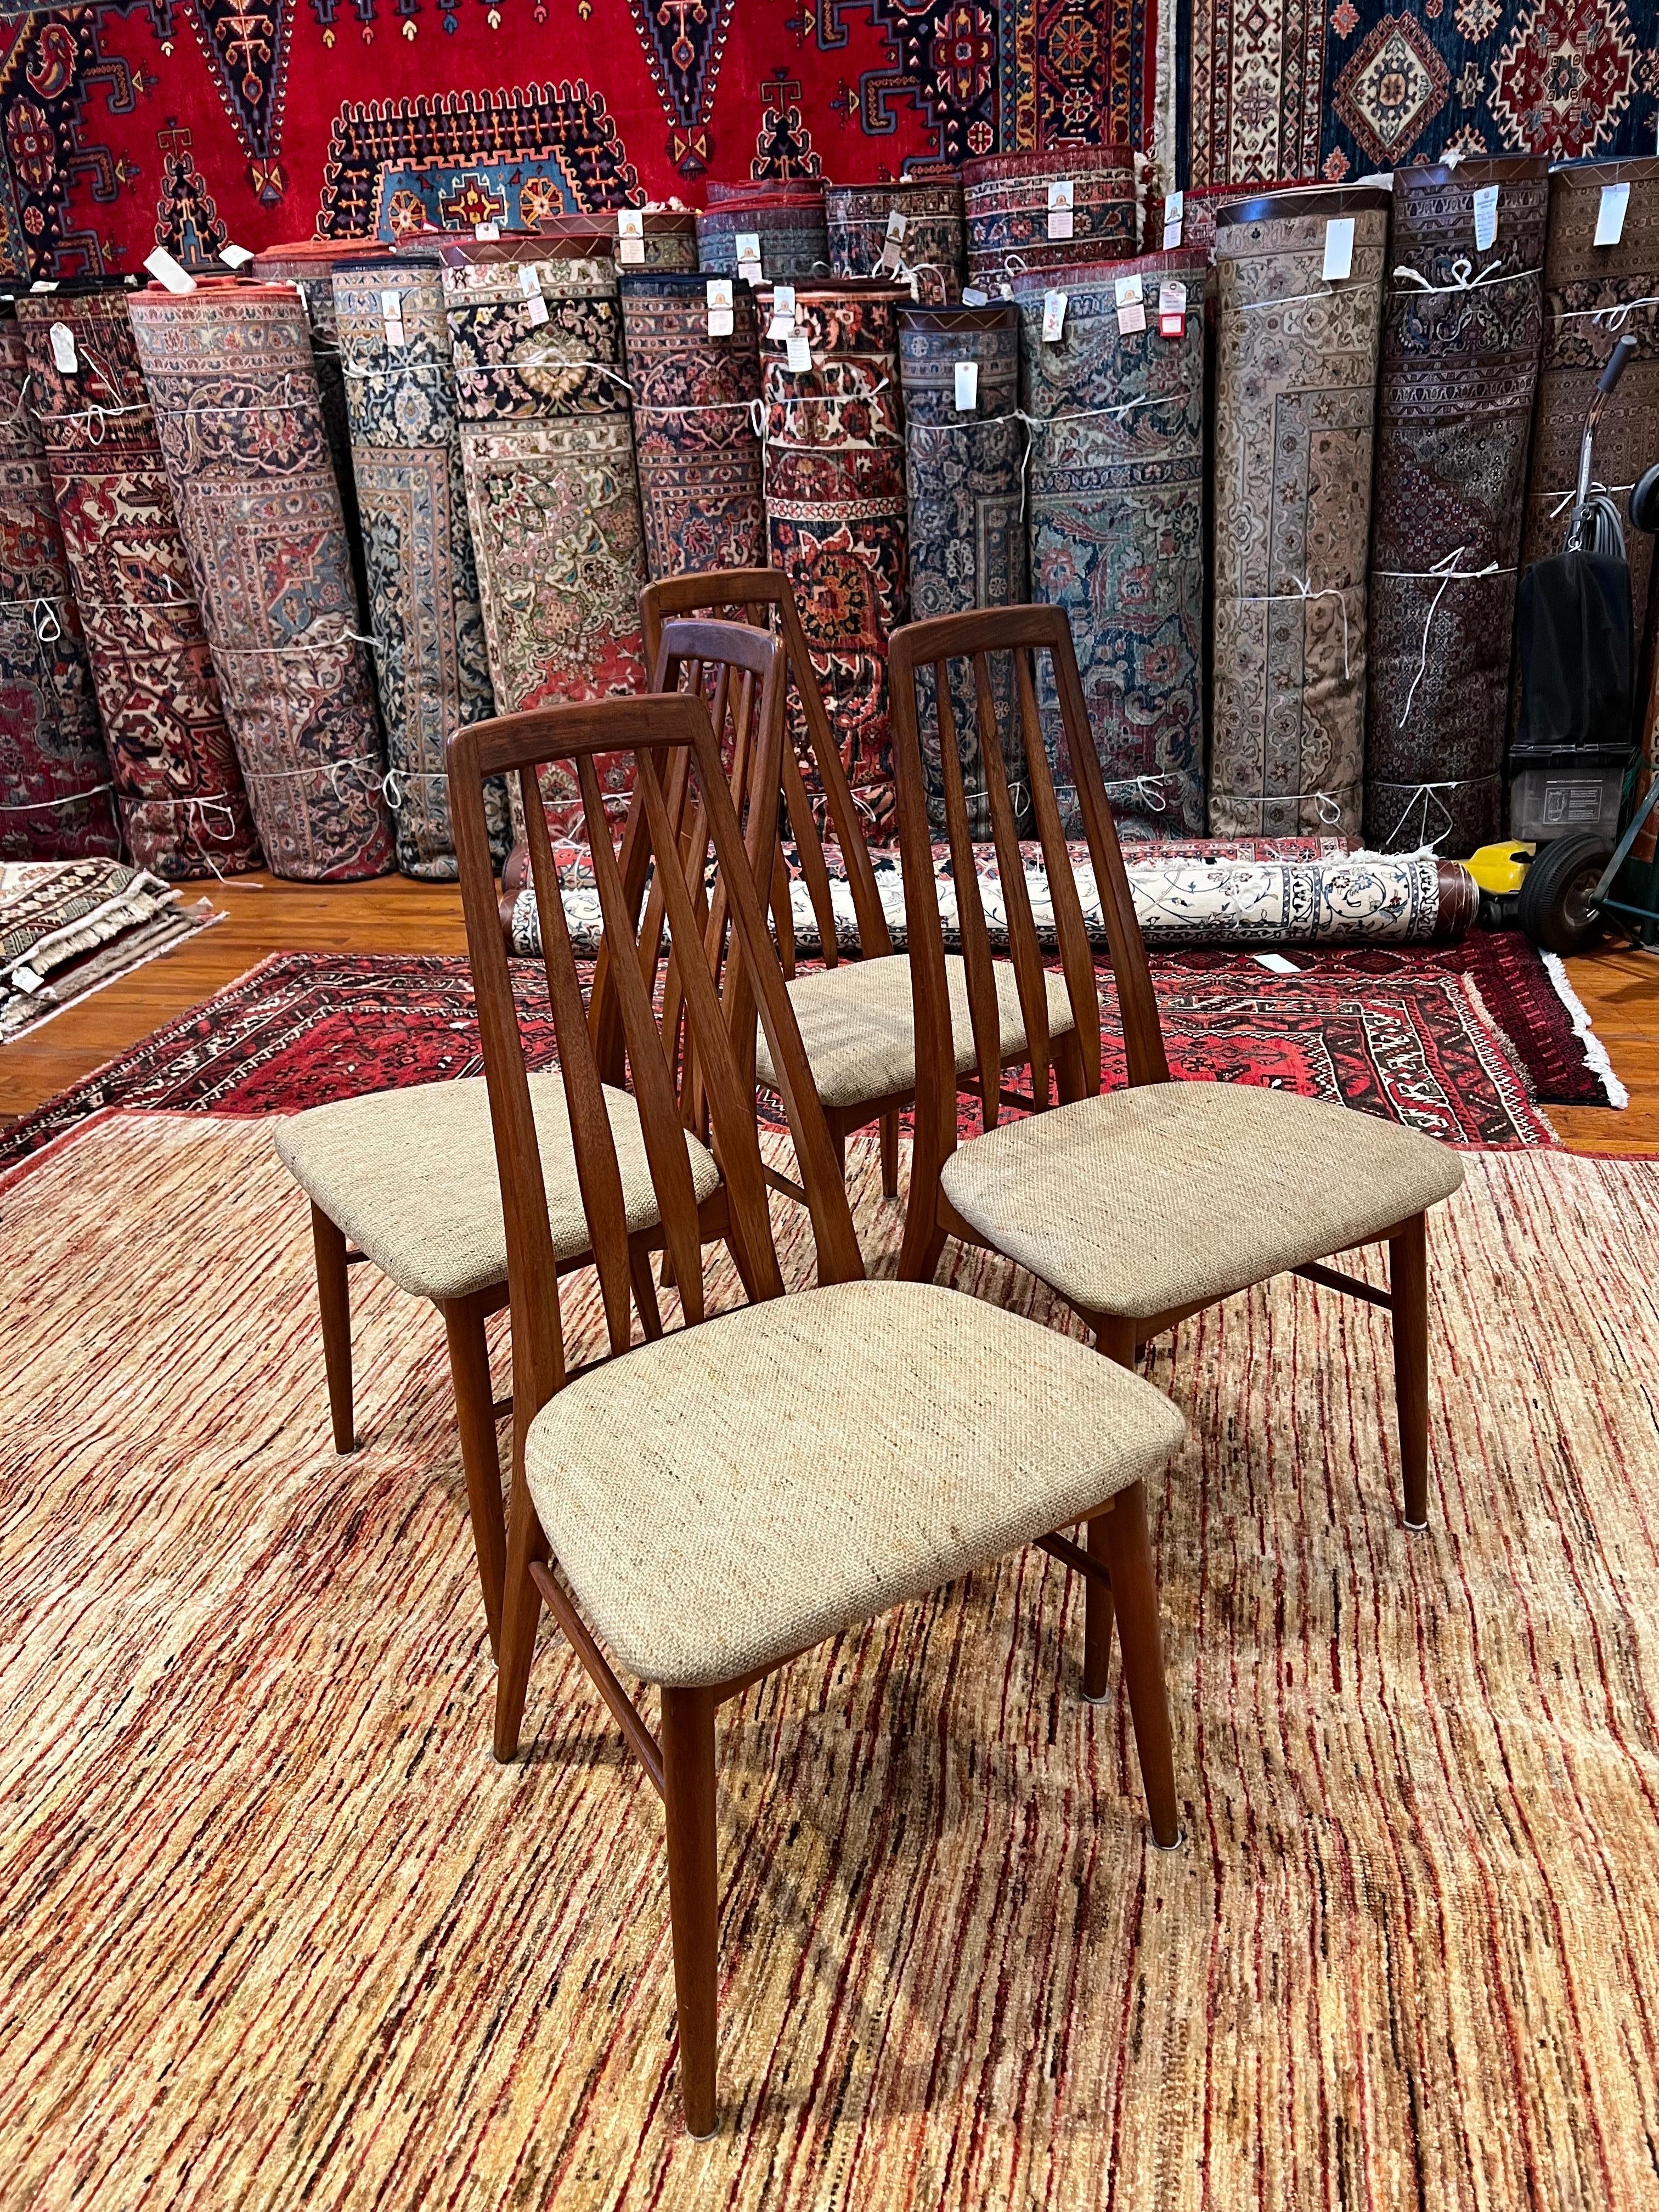 A classic set of six Eva chairs designed by Niels Koefoed, circa the 1960s in solid teak and oatmeal color original fabric. We have clean each chair with solid and sturdy construction. The original fabric retains its original label. The set comes